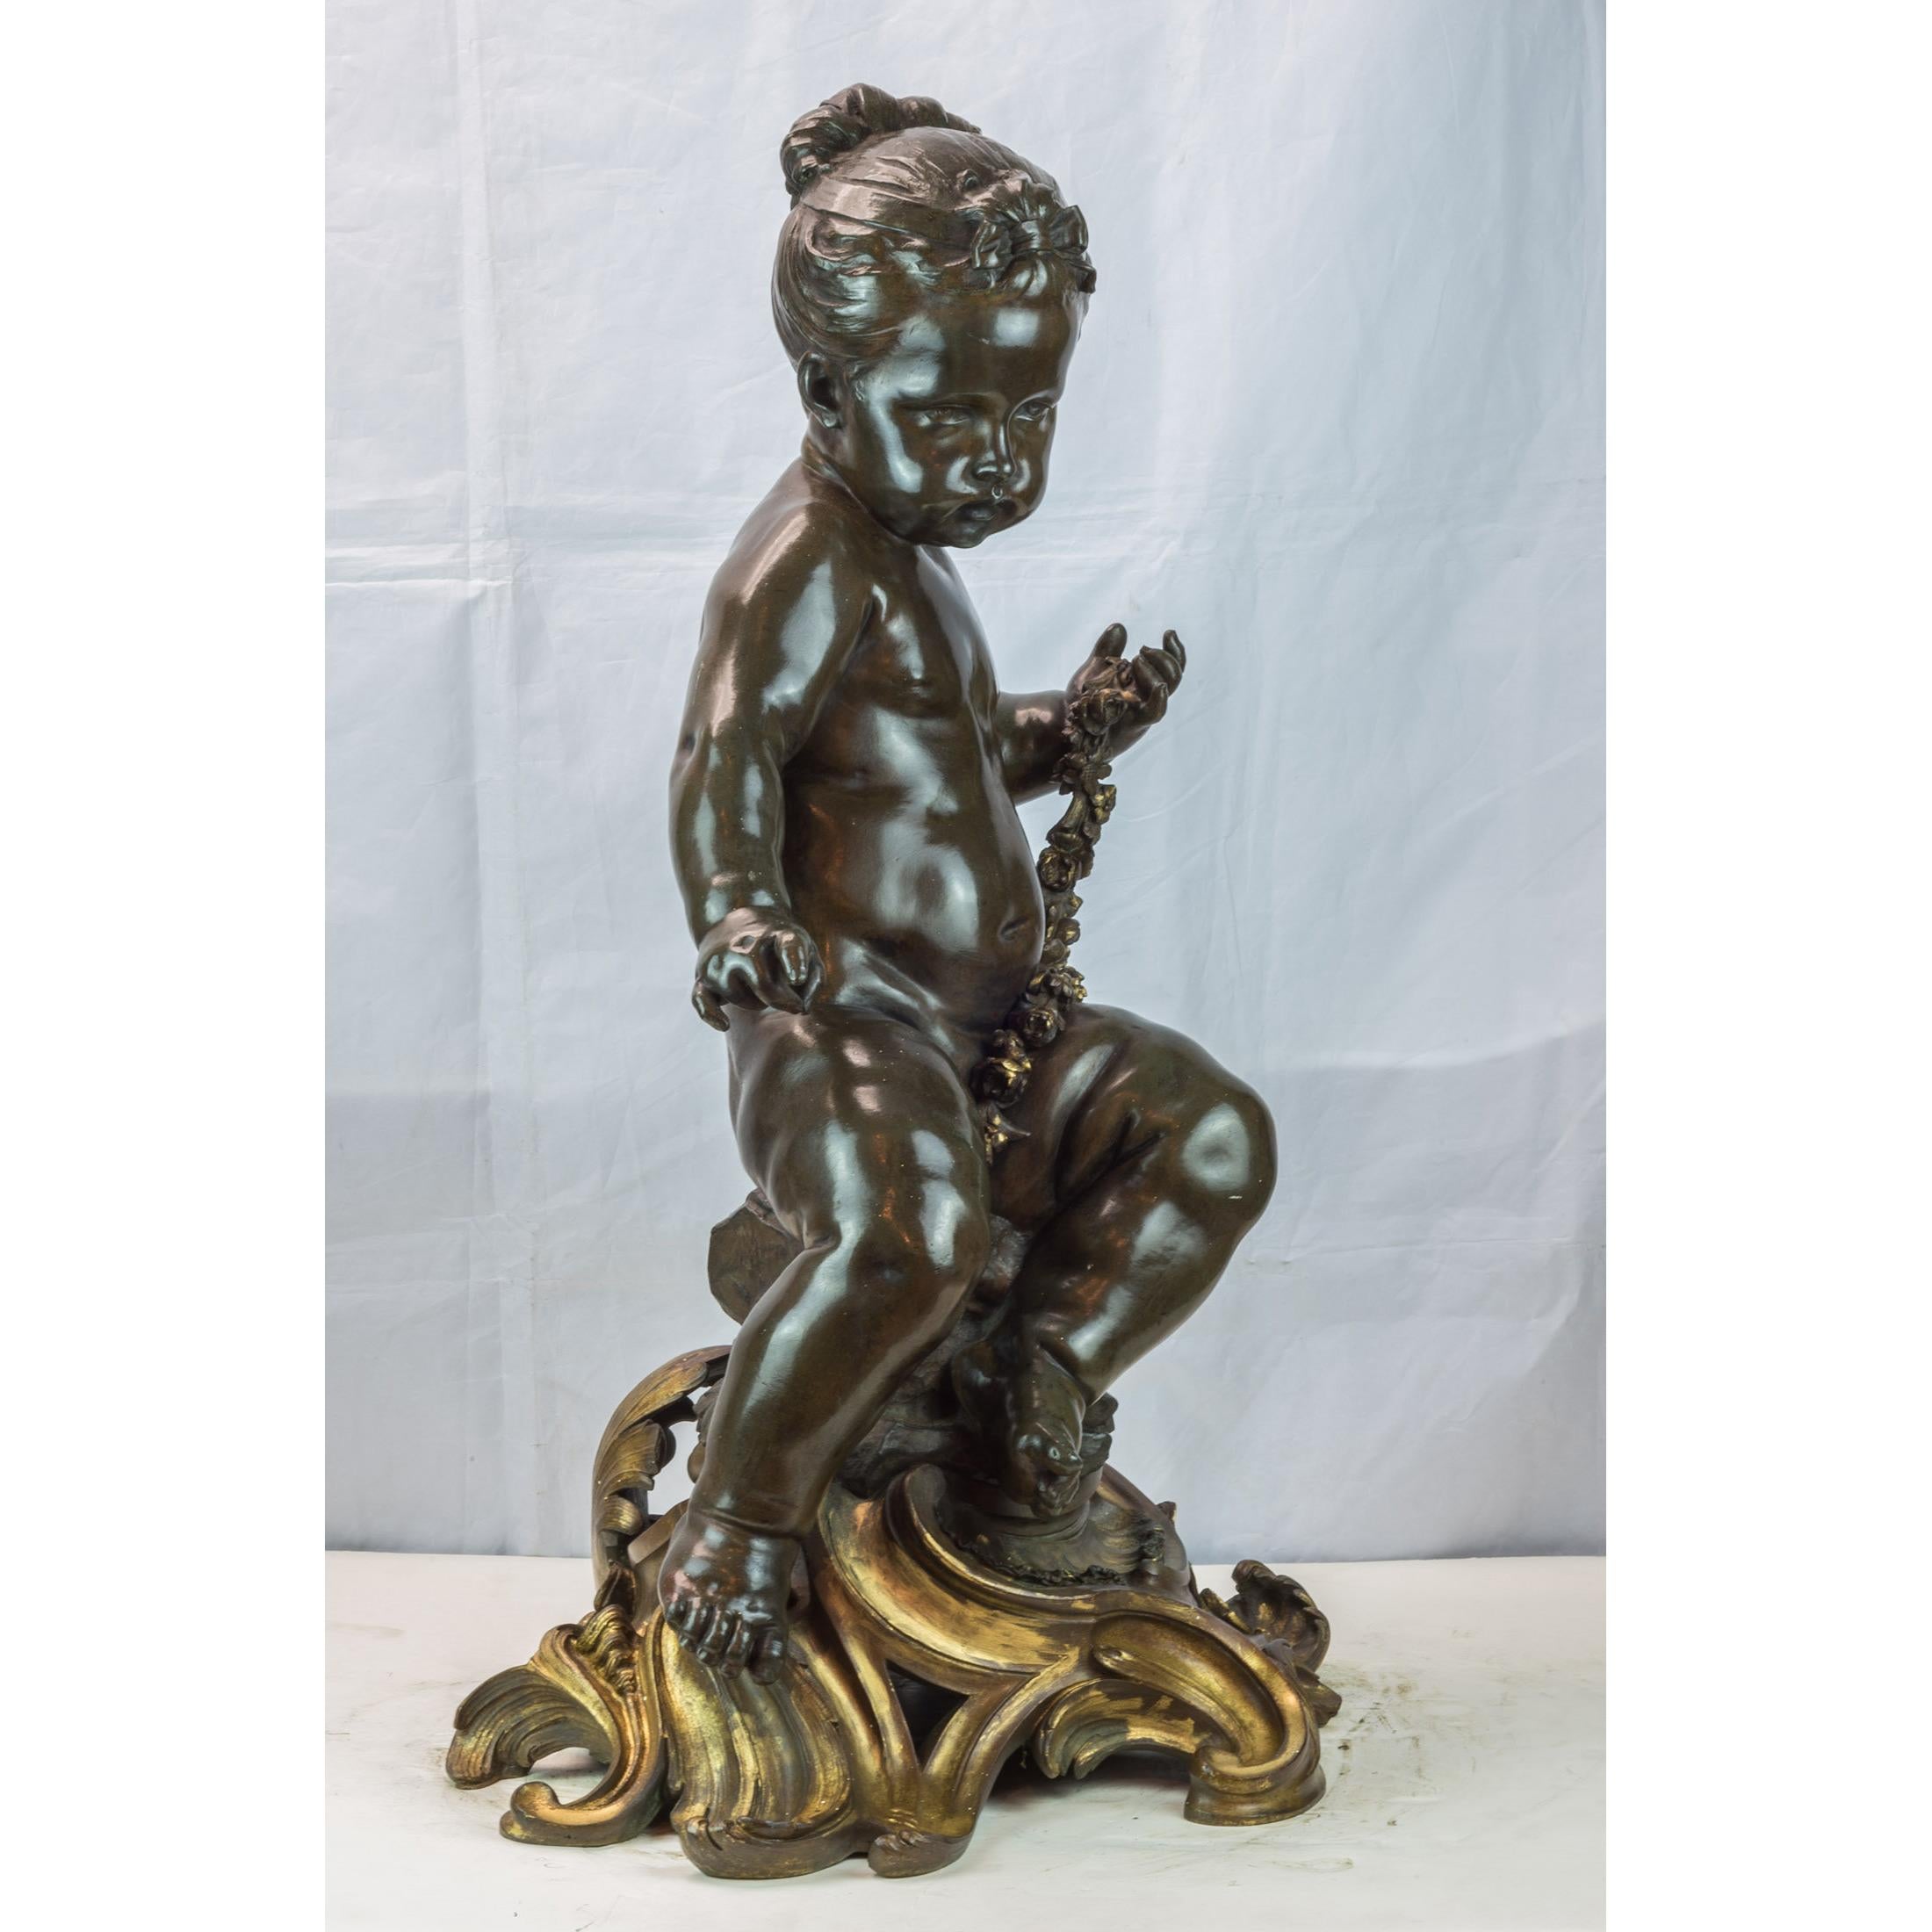 Pair of Figural Sculptures of Seated Cherubs - Gold Figurative Sculpture by Alphonse H. Nelson